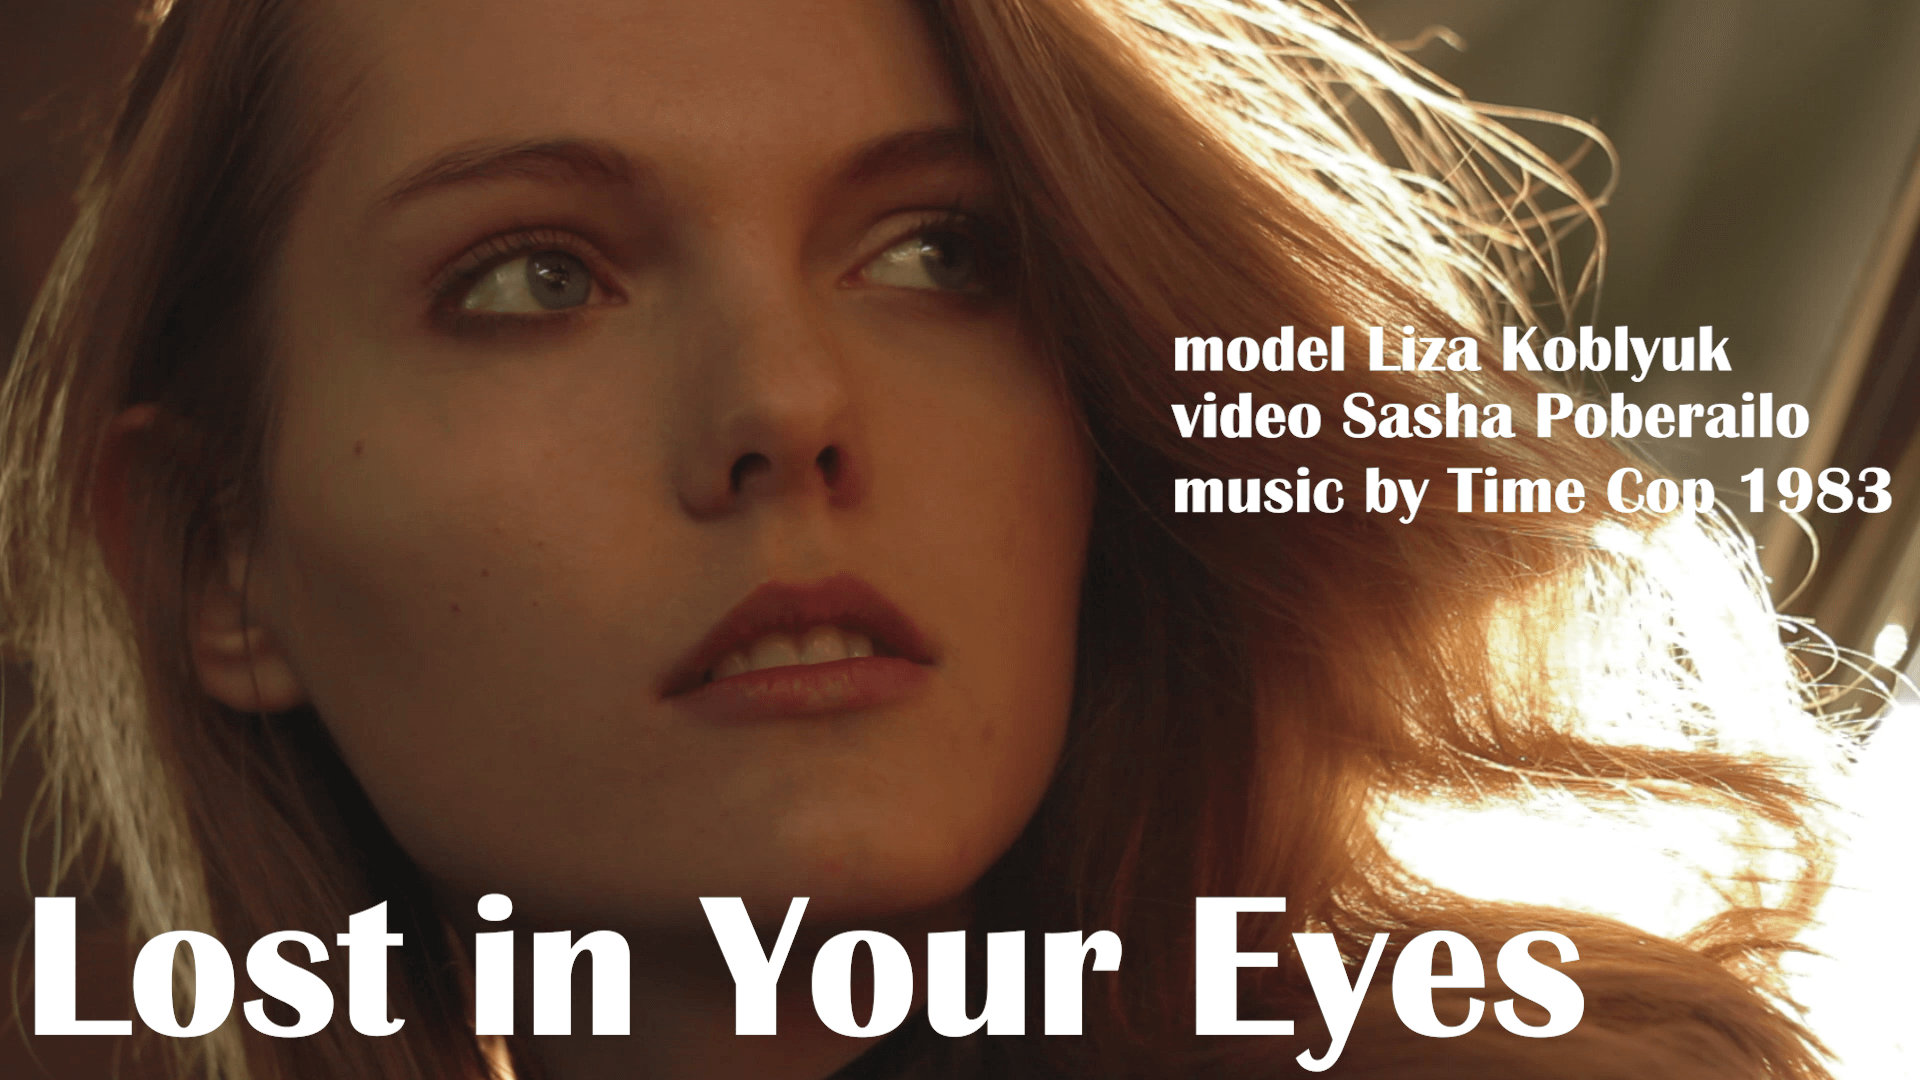 lost in your eyes - fashion, model, summer